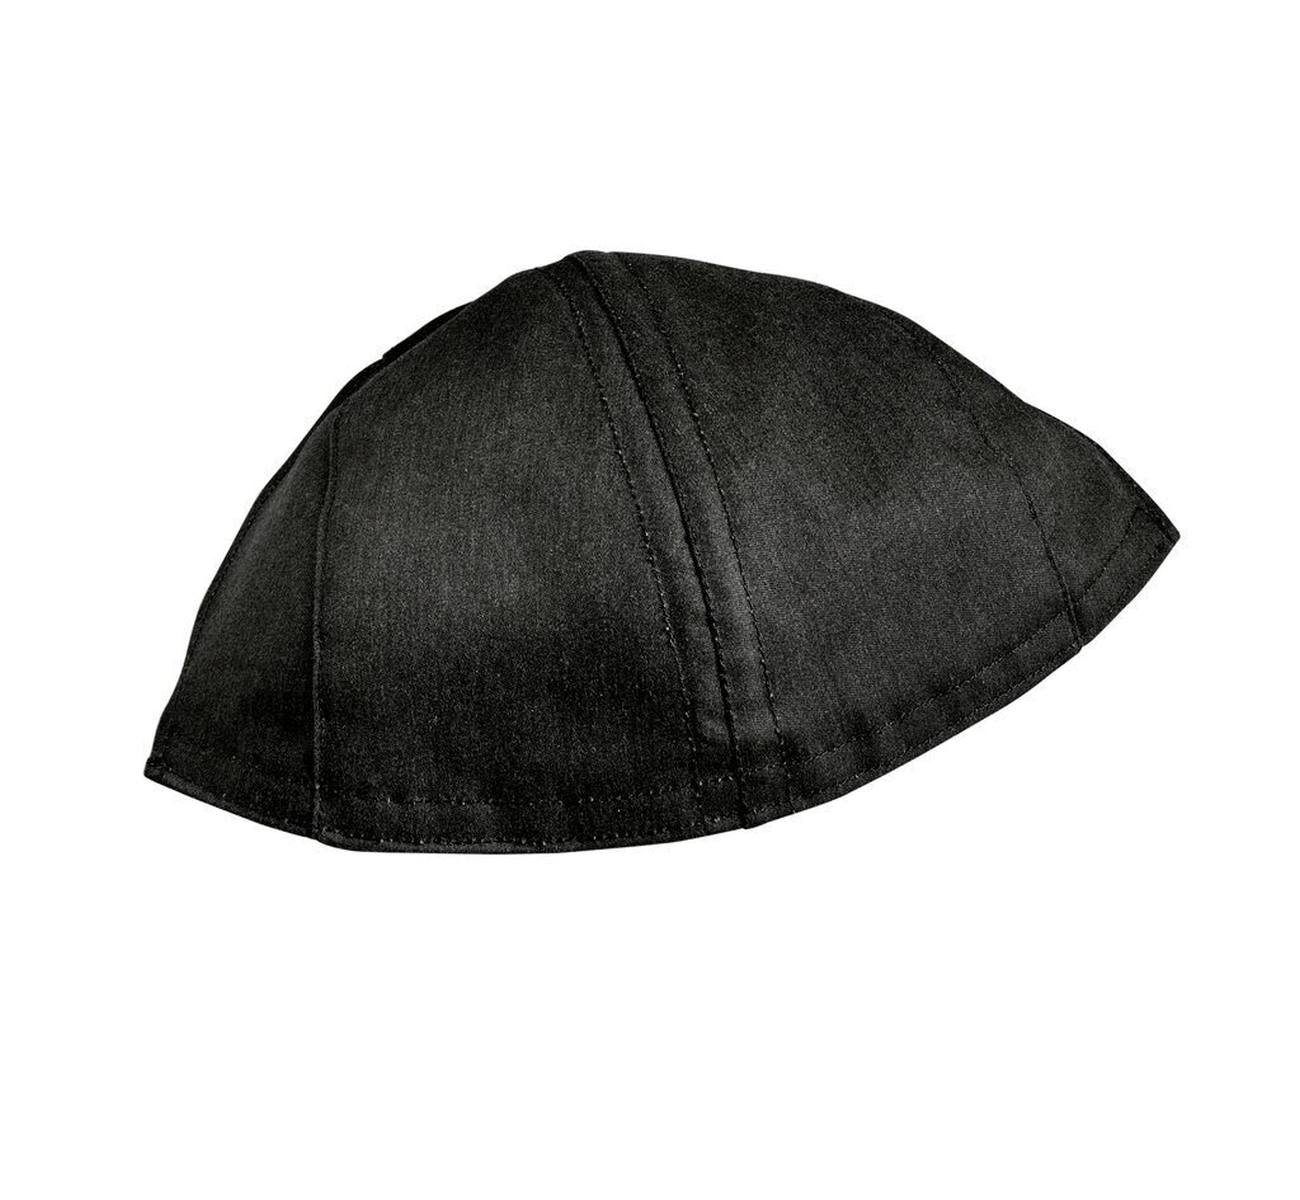 3M FC1-GR forehead protector, cotton aramid, protects the helmet from flames and metal splashes